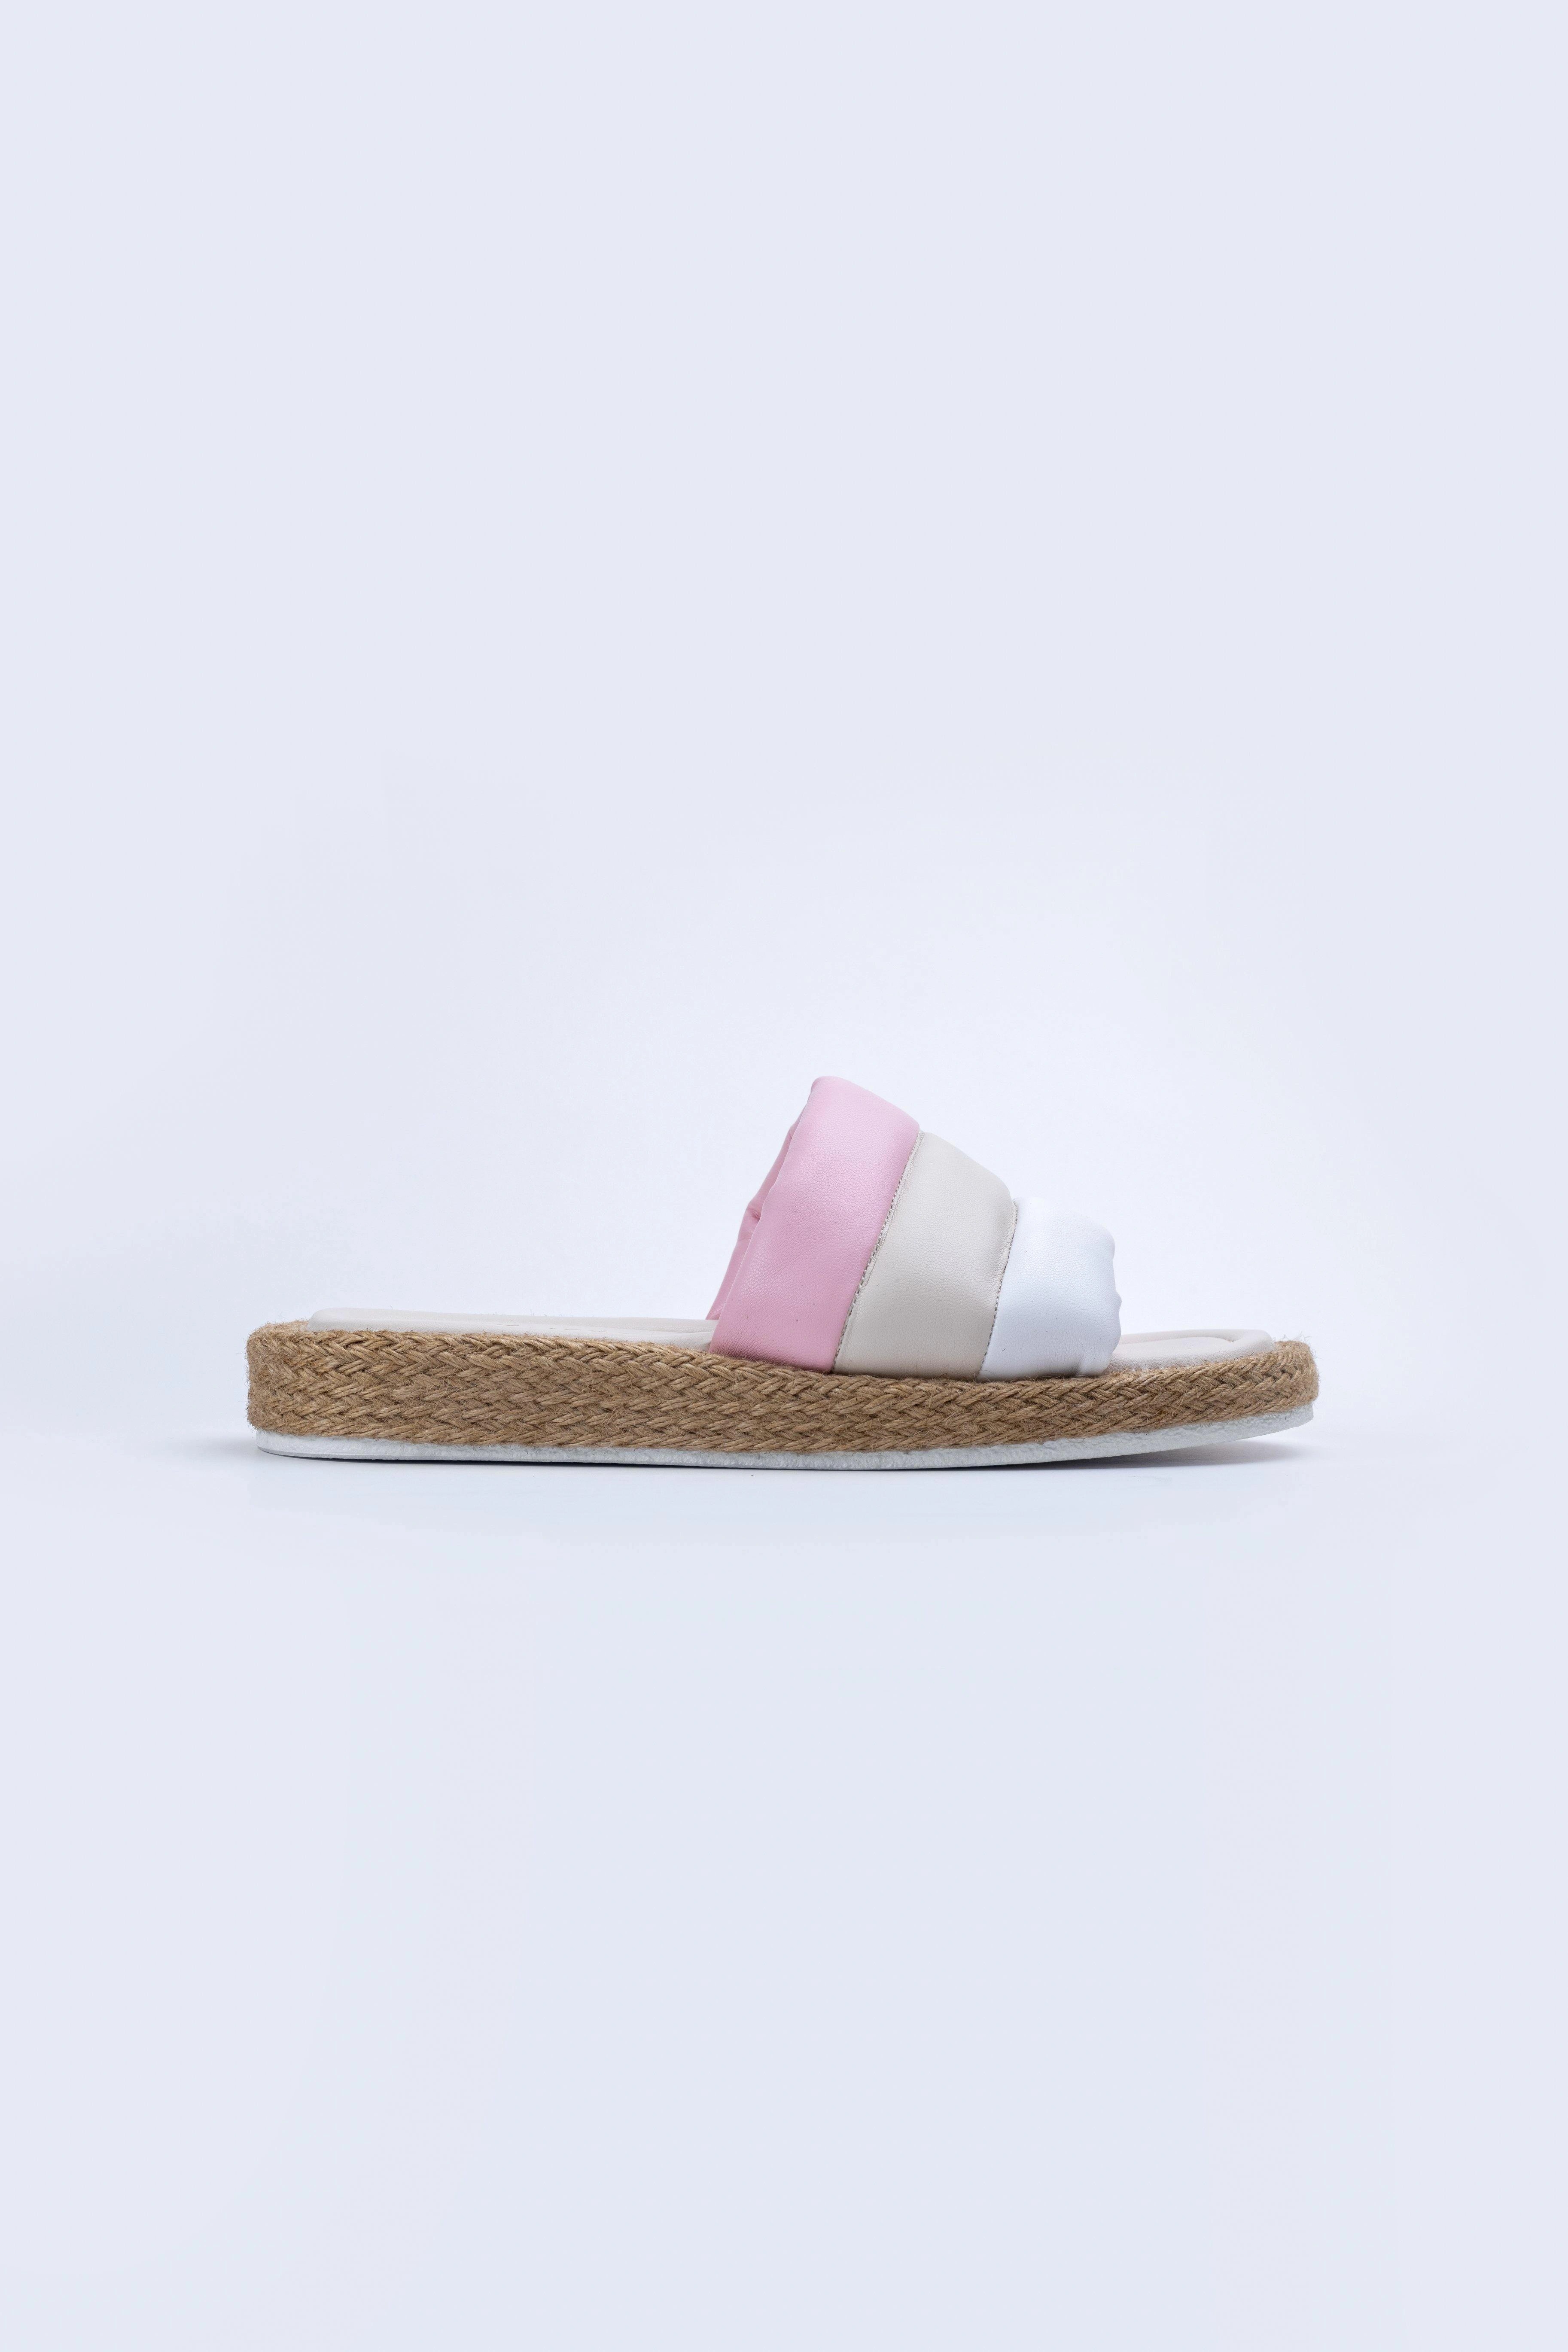 Puffy pink flat slippers